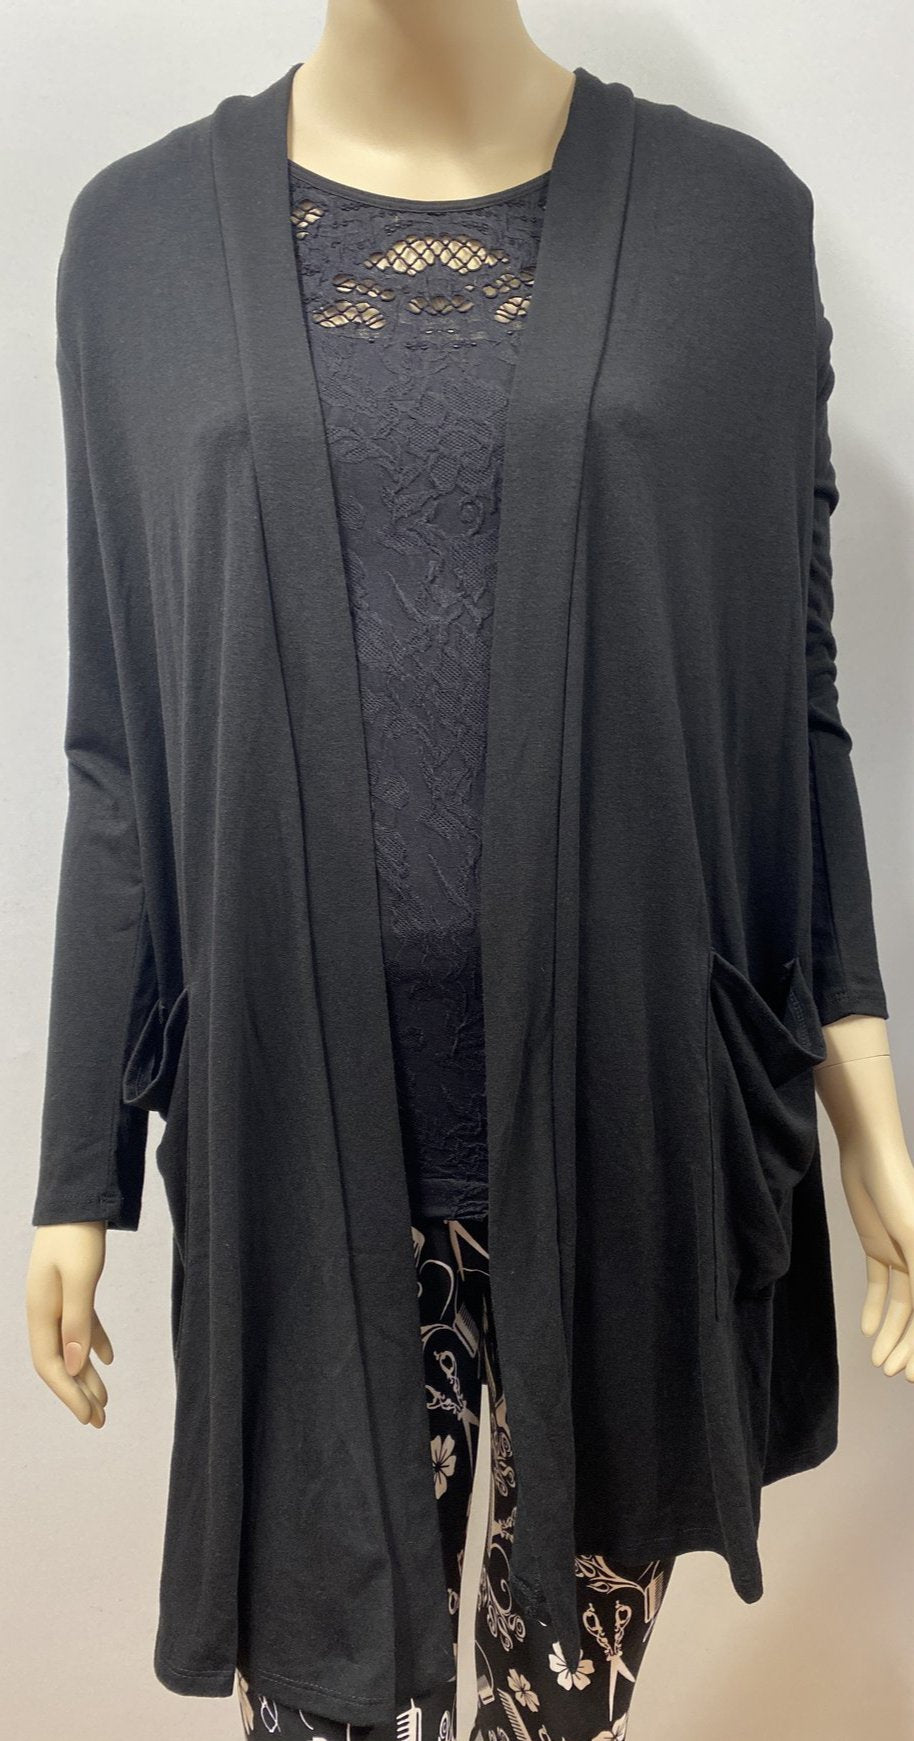 Stylist Long Sleeve Cardigan with Front Pockets and Scissor Rhinestones